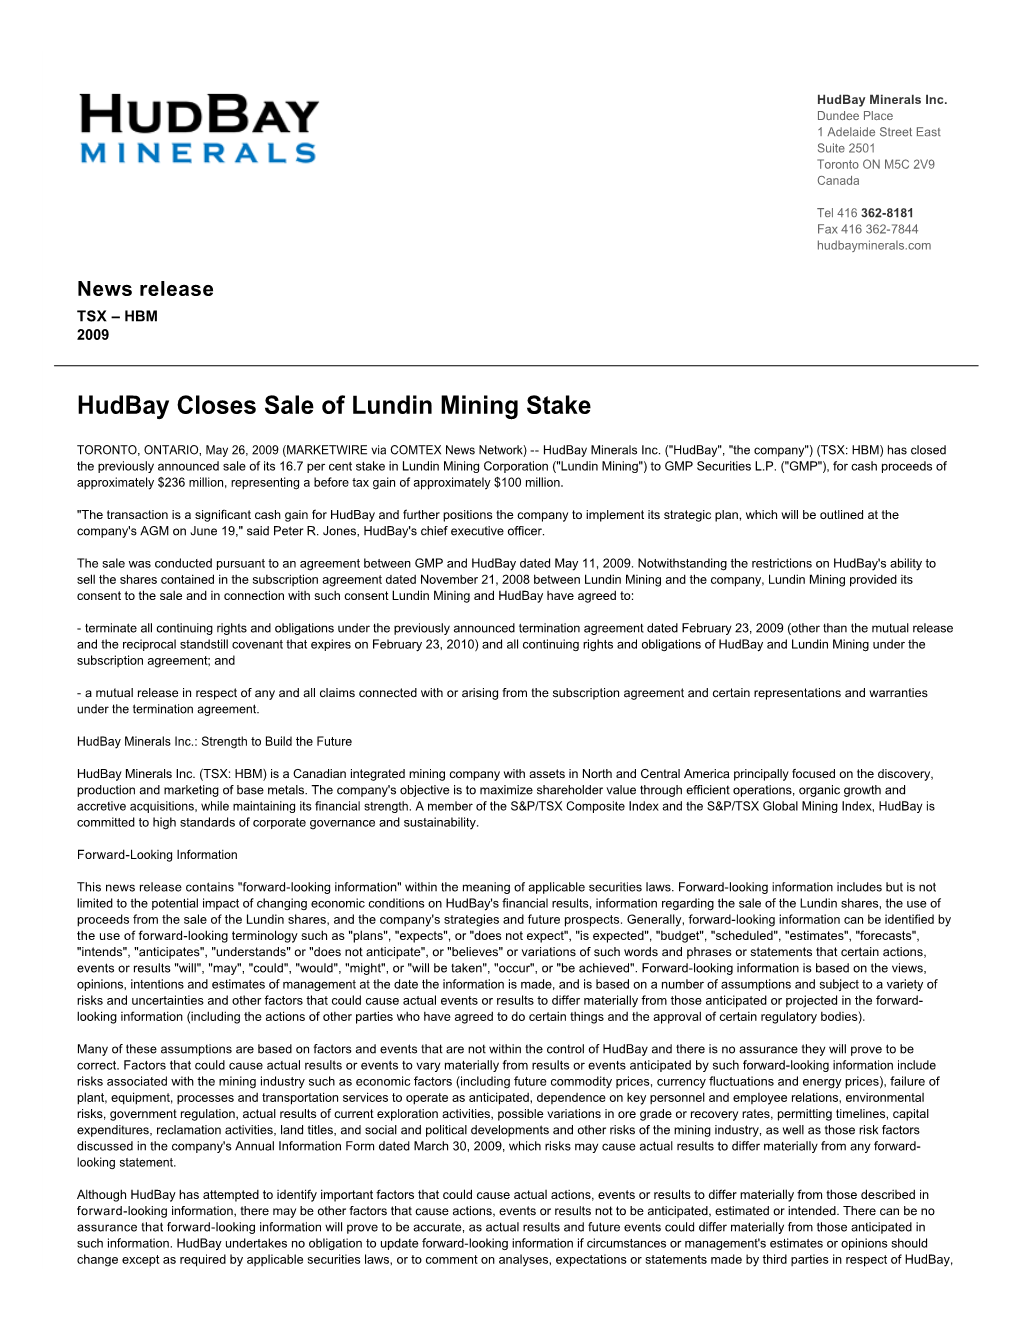 Hudbay Closes Sale of Lundin Mining Stake